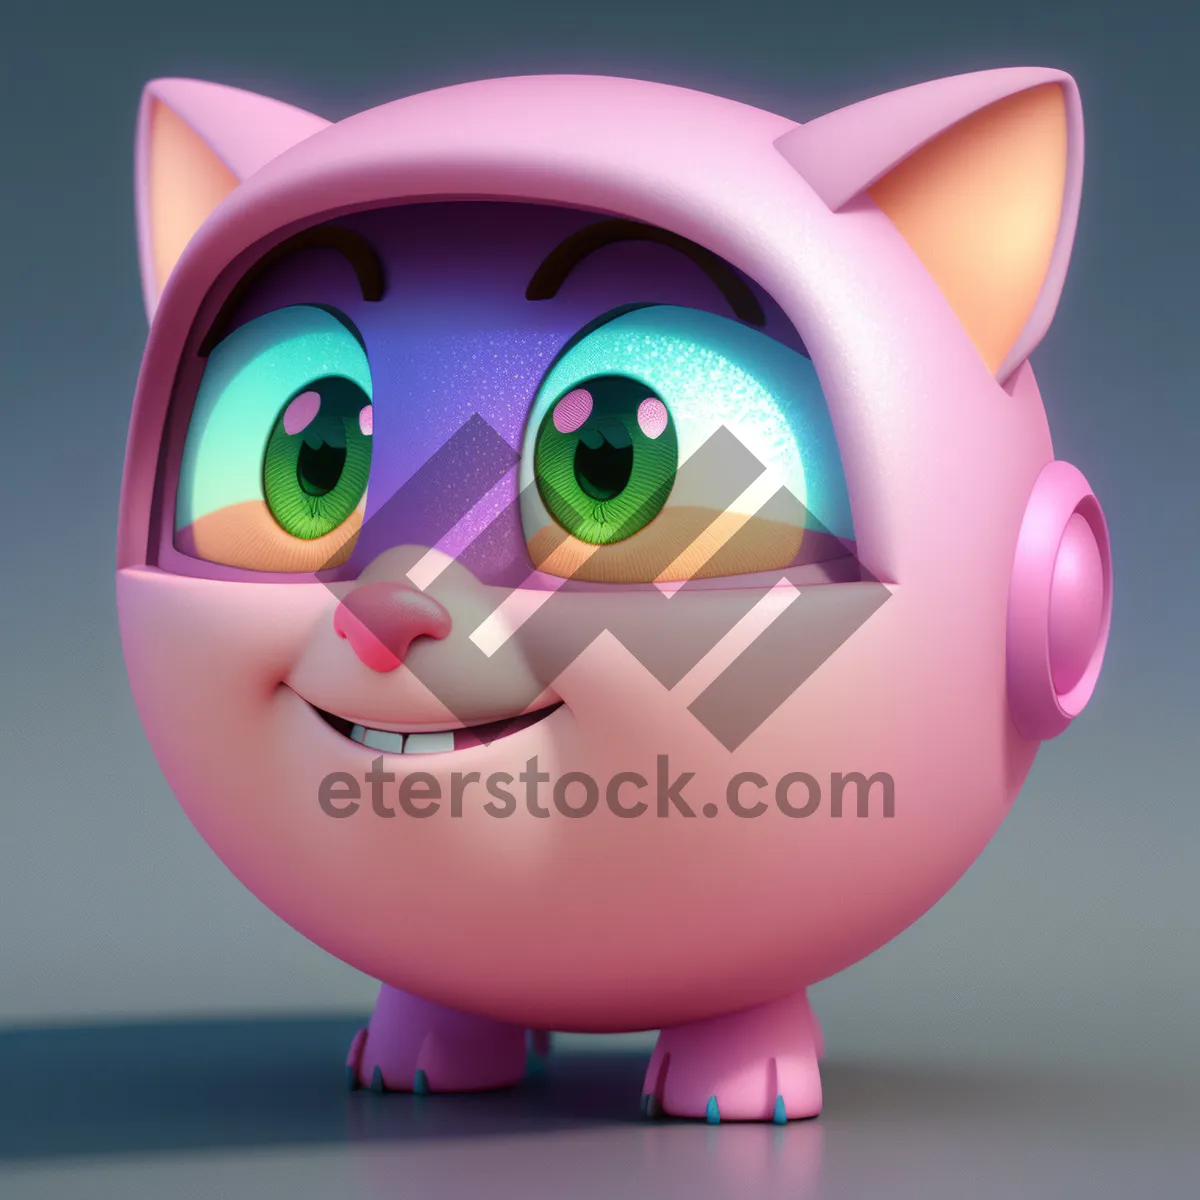 Picture of Piggy Savings: Ceramic Piggy Bank for Financial Investment.